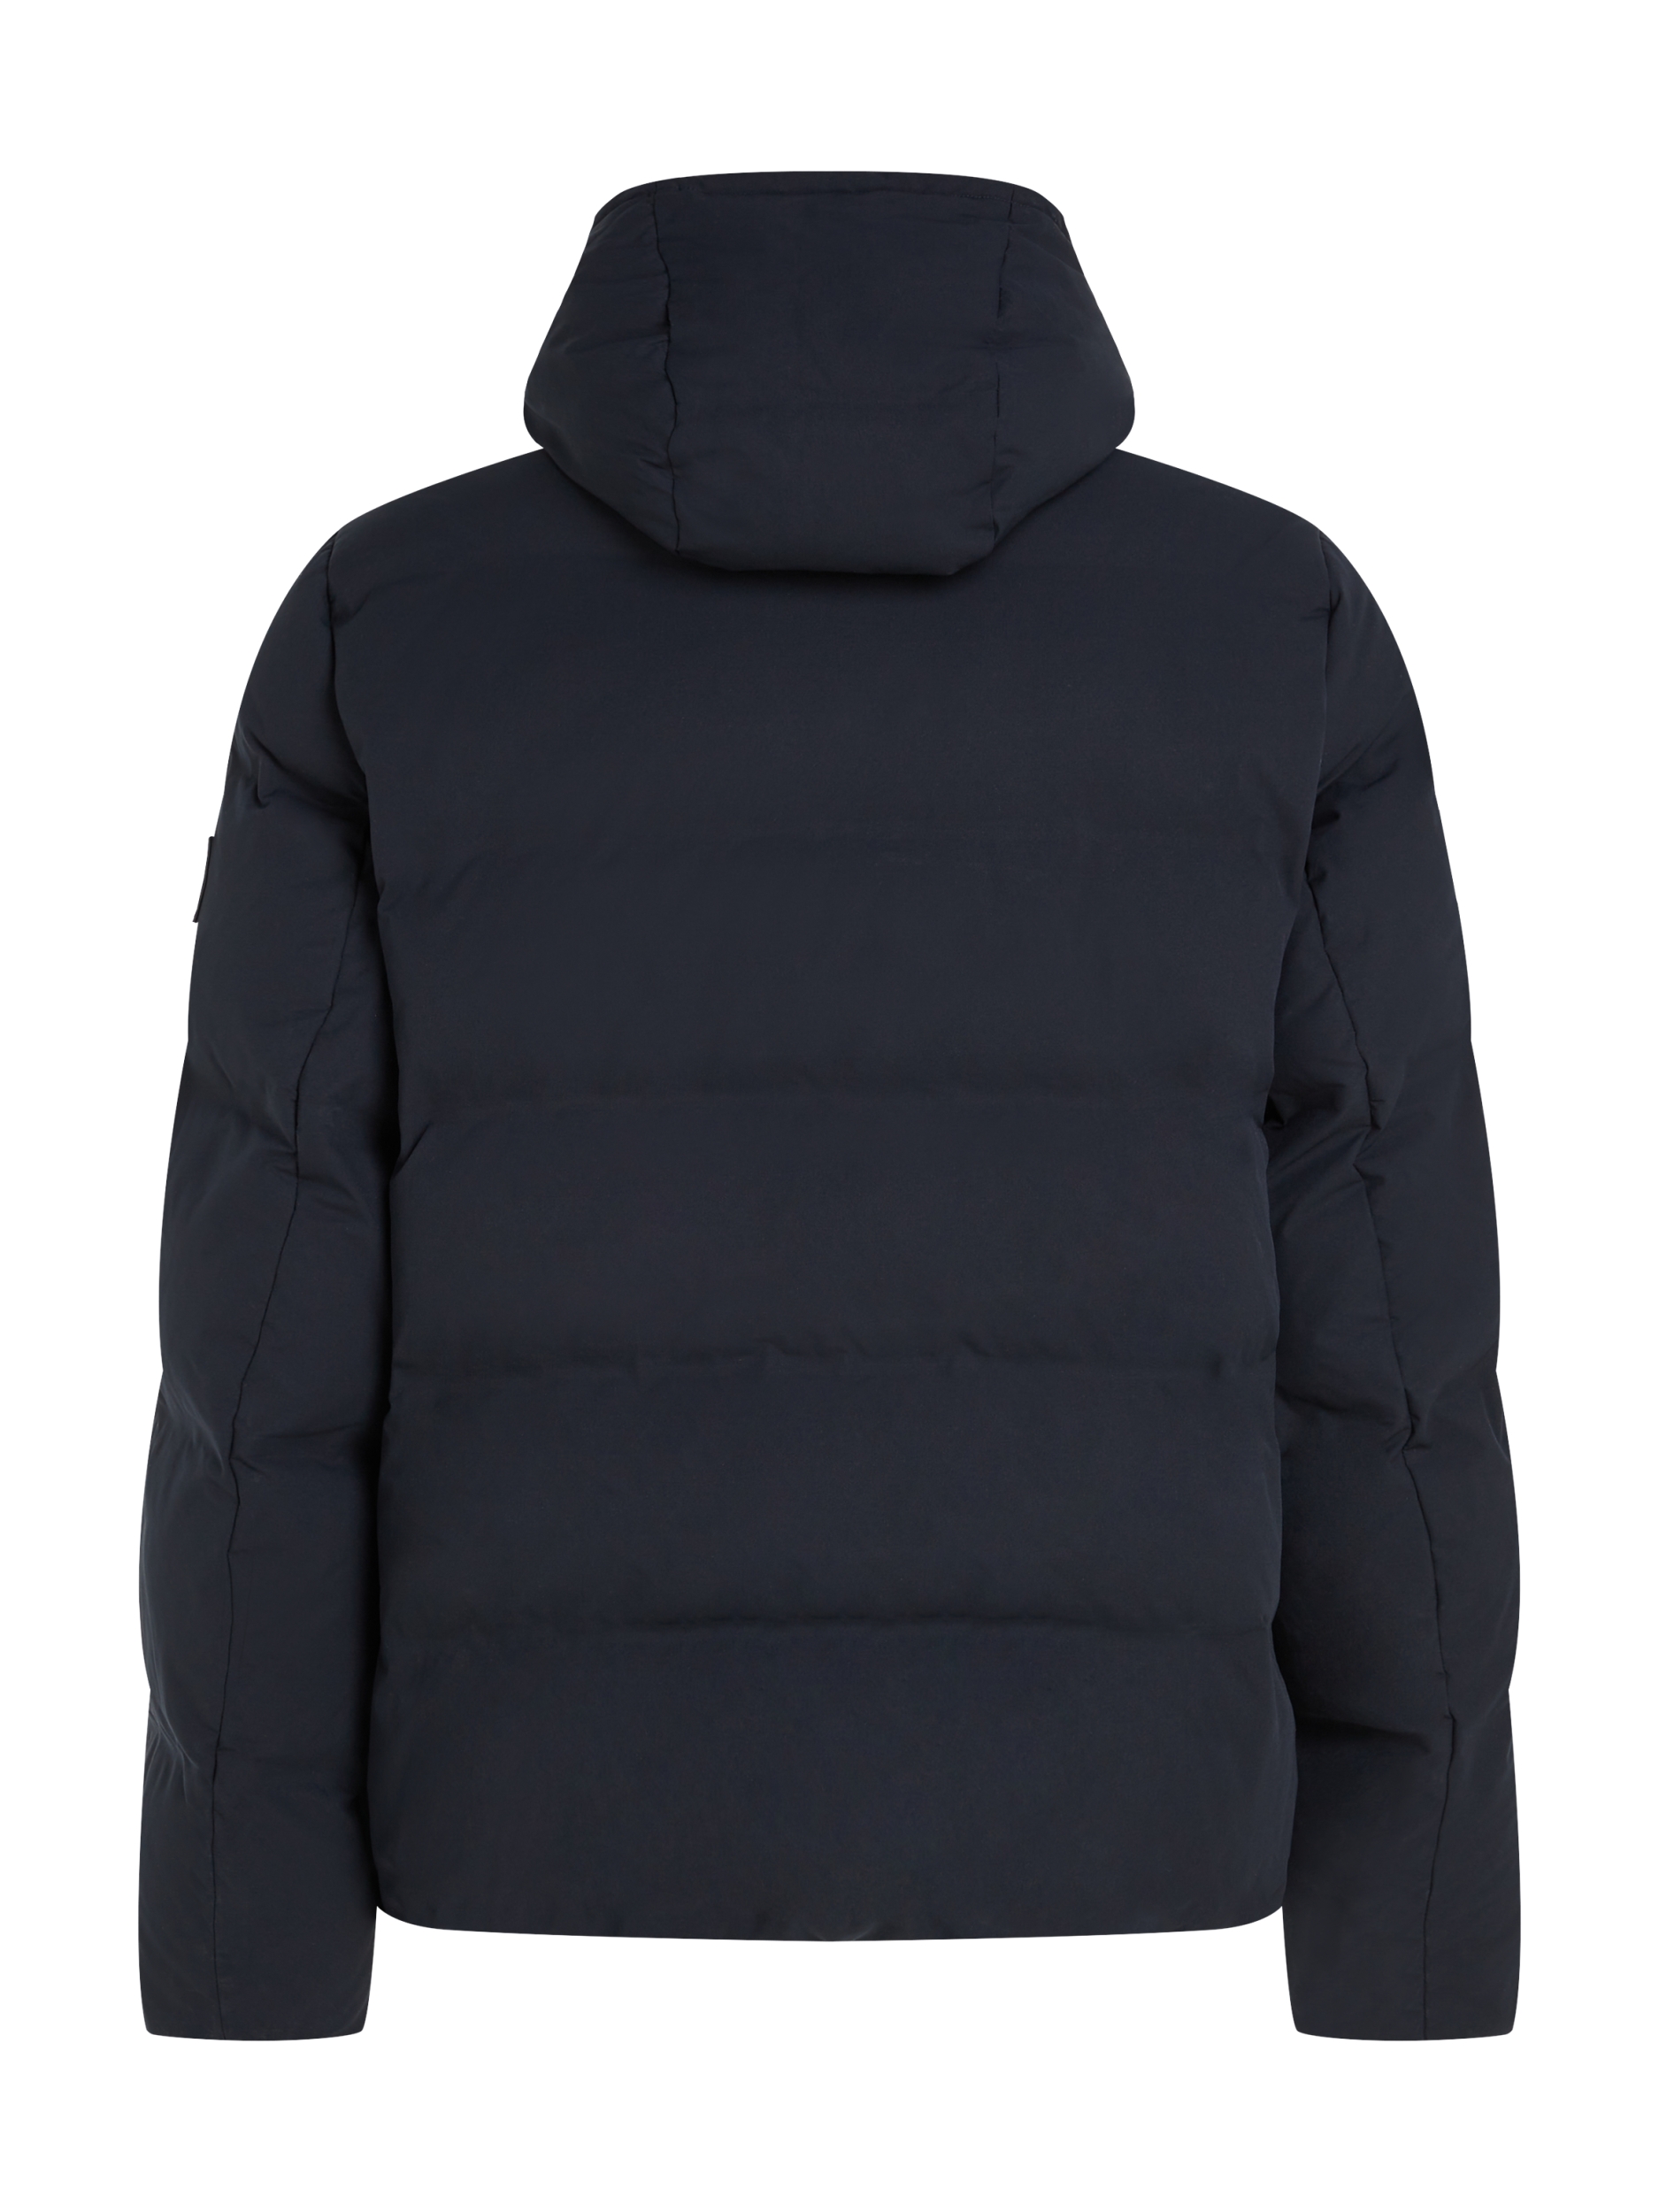 CL MOTION HOODED JACKET